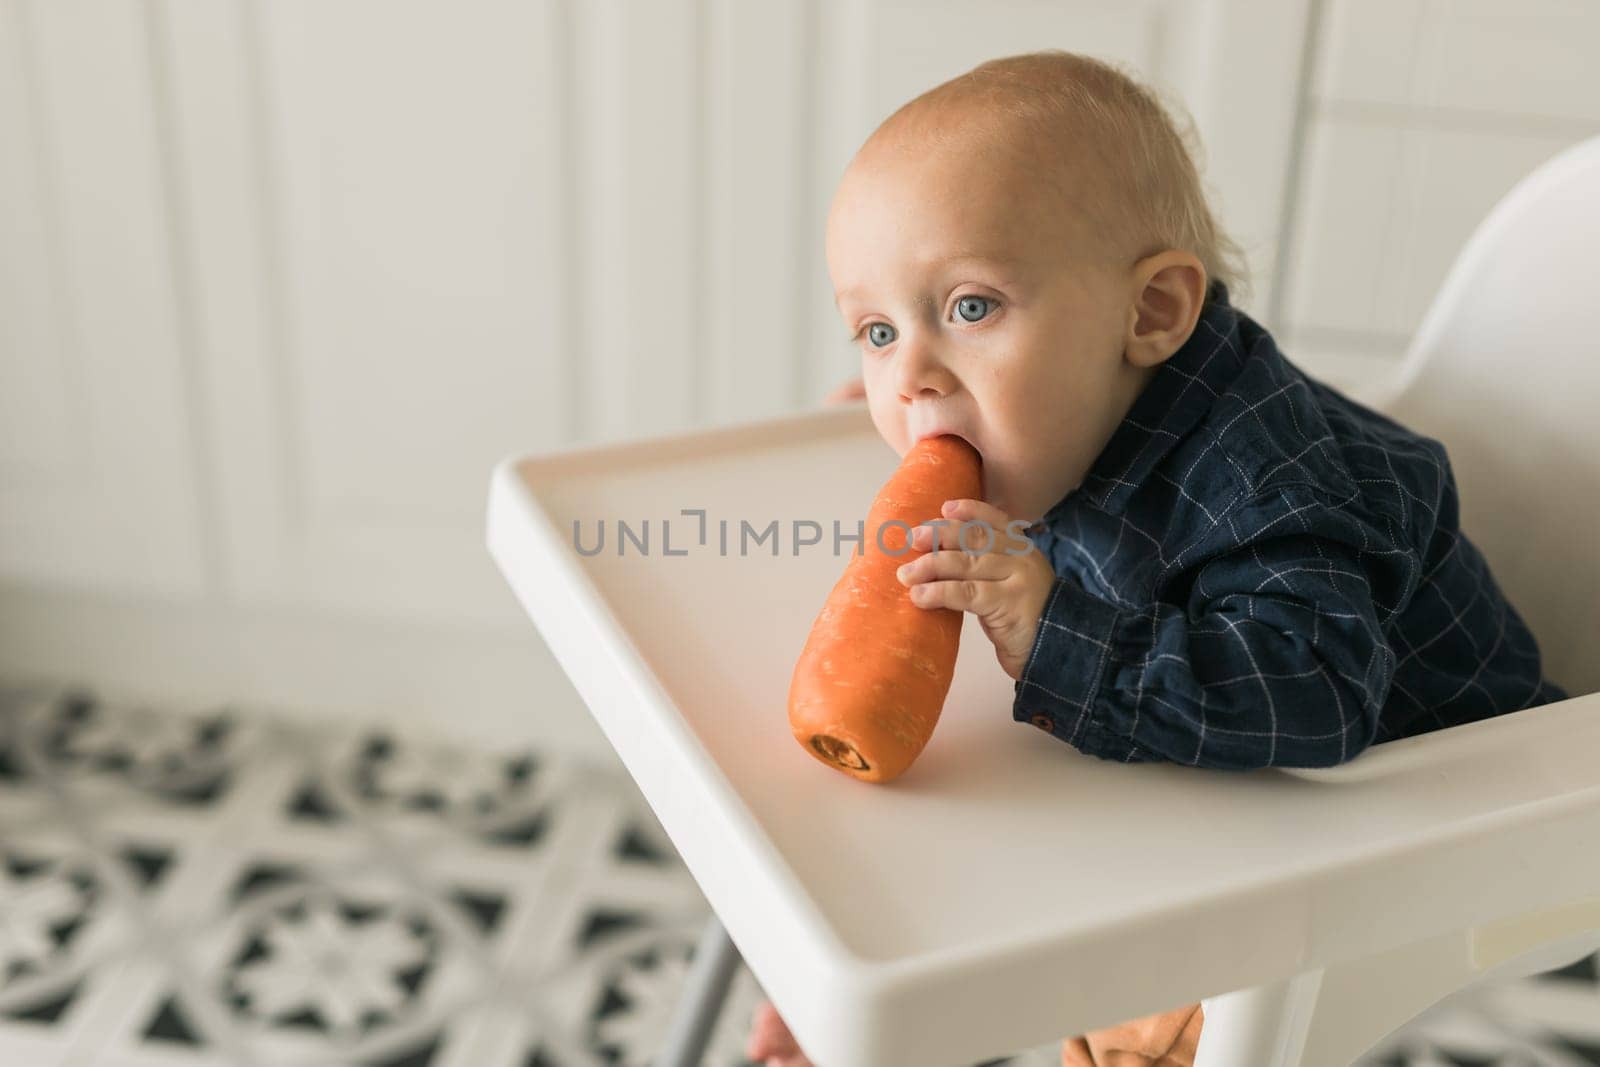 Happy baby sitting in high chair eating carrot in kitchen. Healthy nutrition for kids. Bio carrot as first solid food for infant. Children eat vegetables. Little boy biting raw vegetable